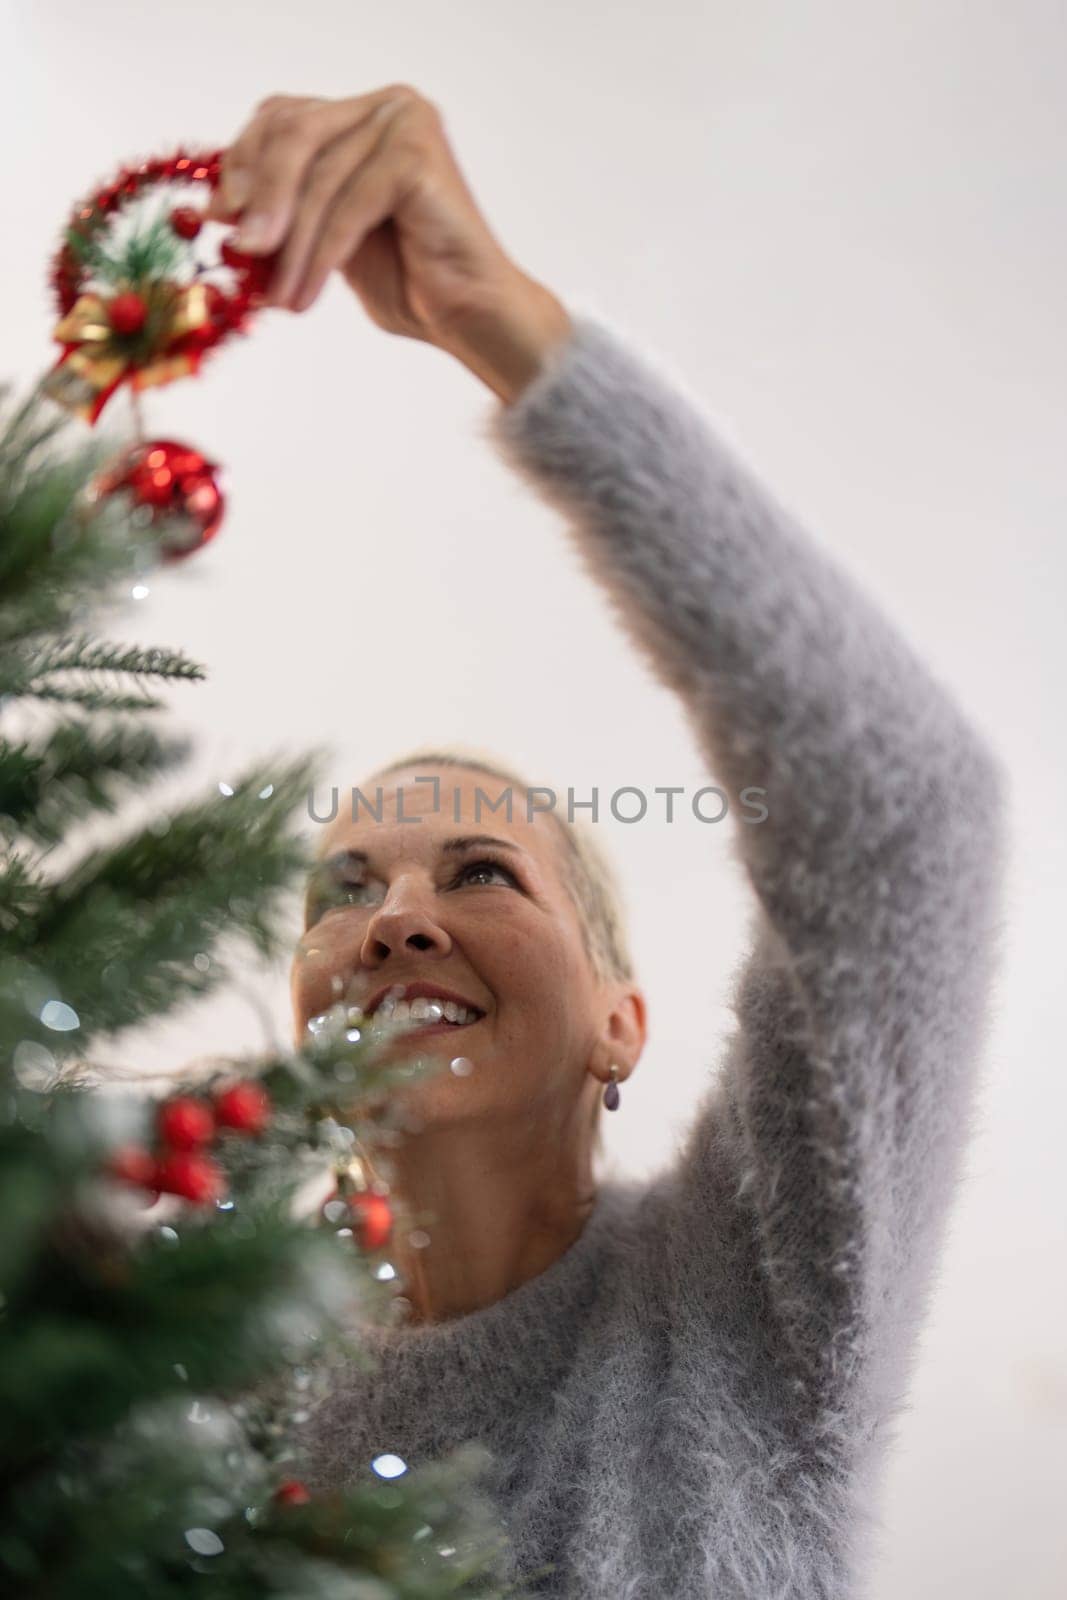 Cheerful elderly woman decorat the christmas tree. Christmas atmosphere at cozy home interior by nateemee